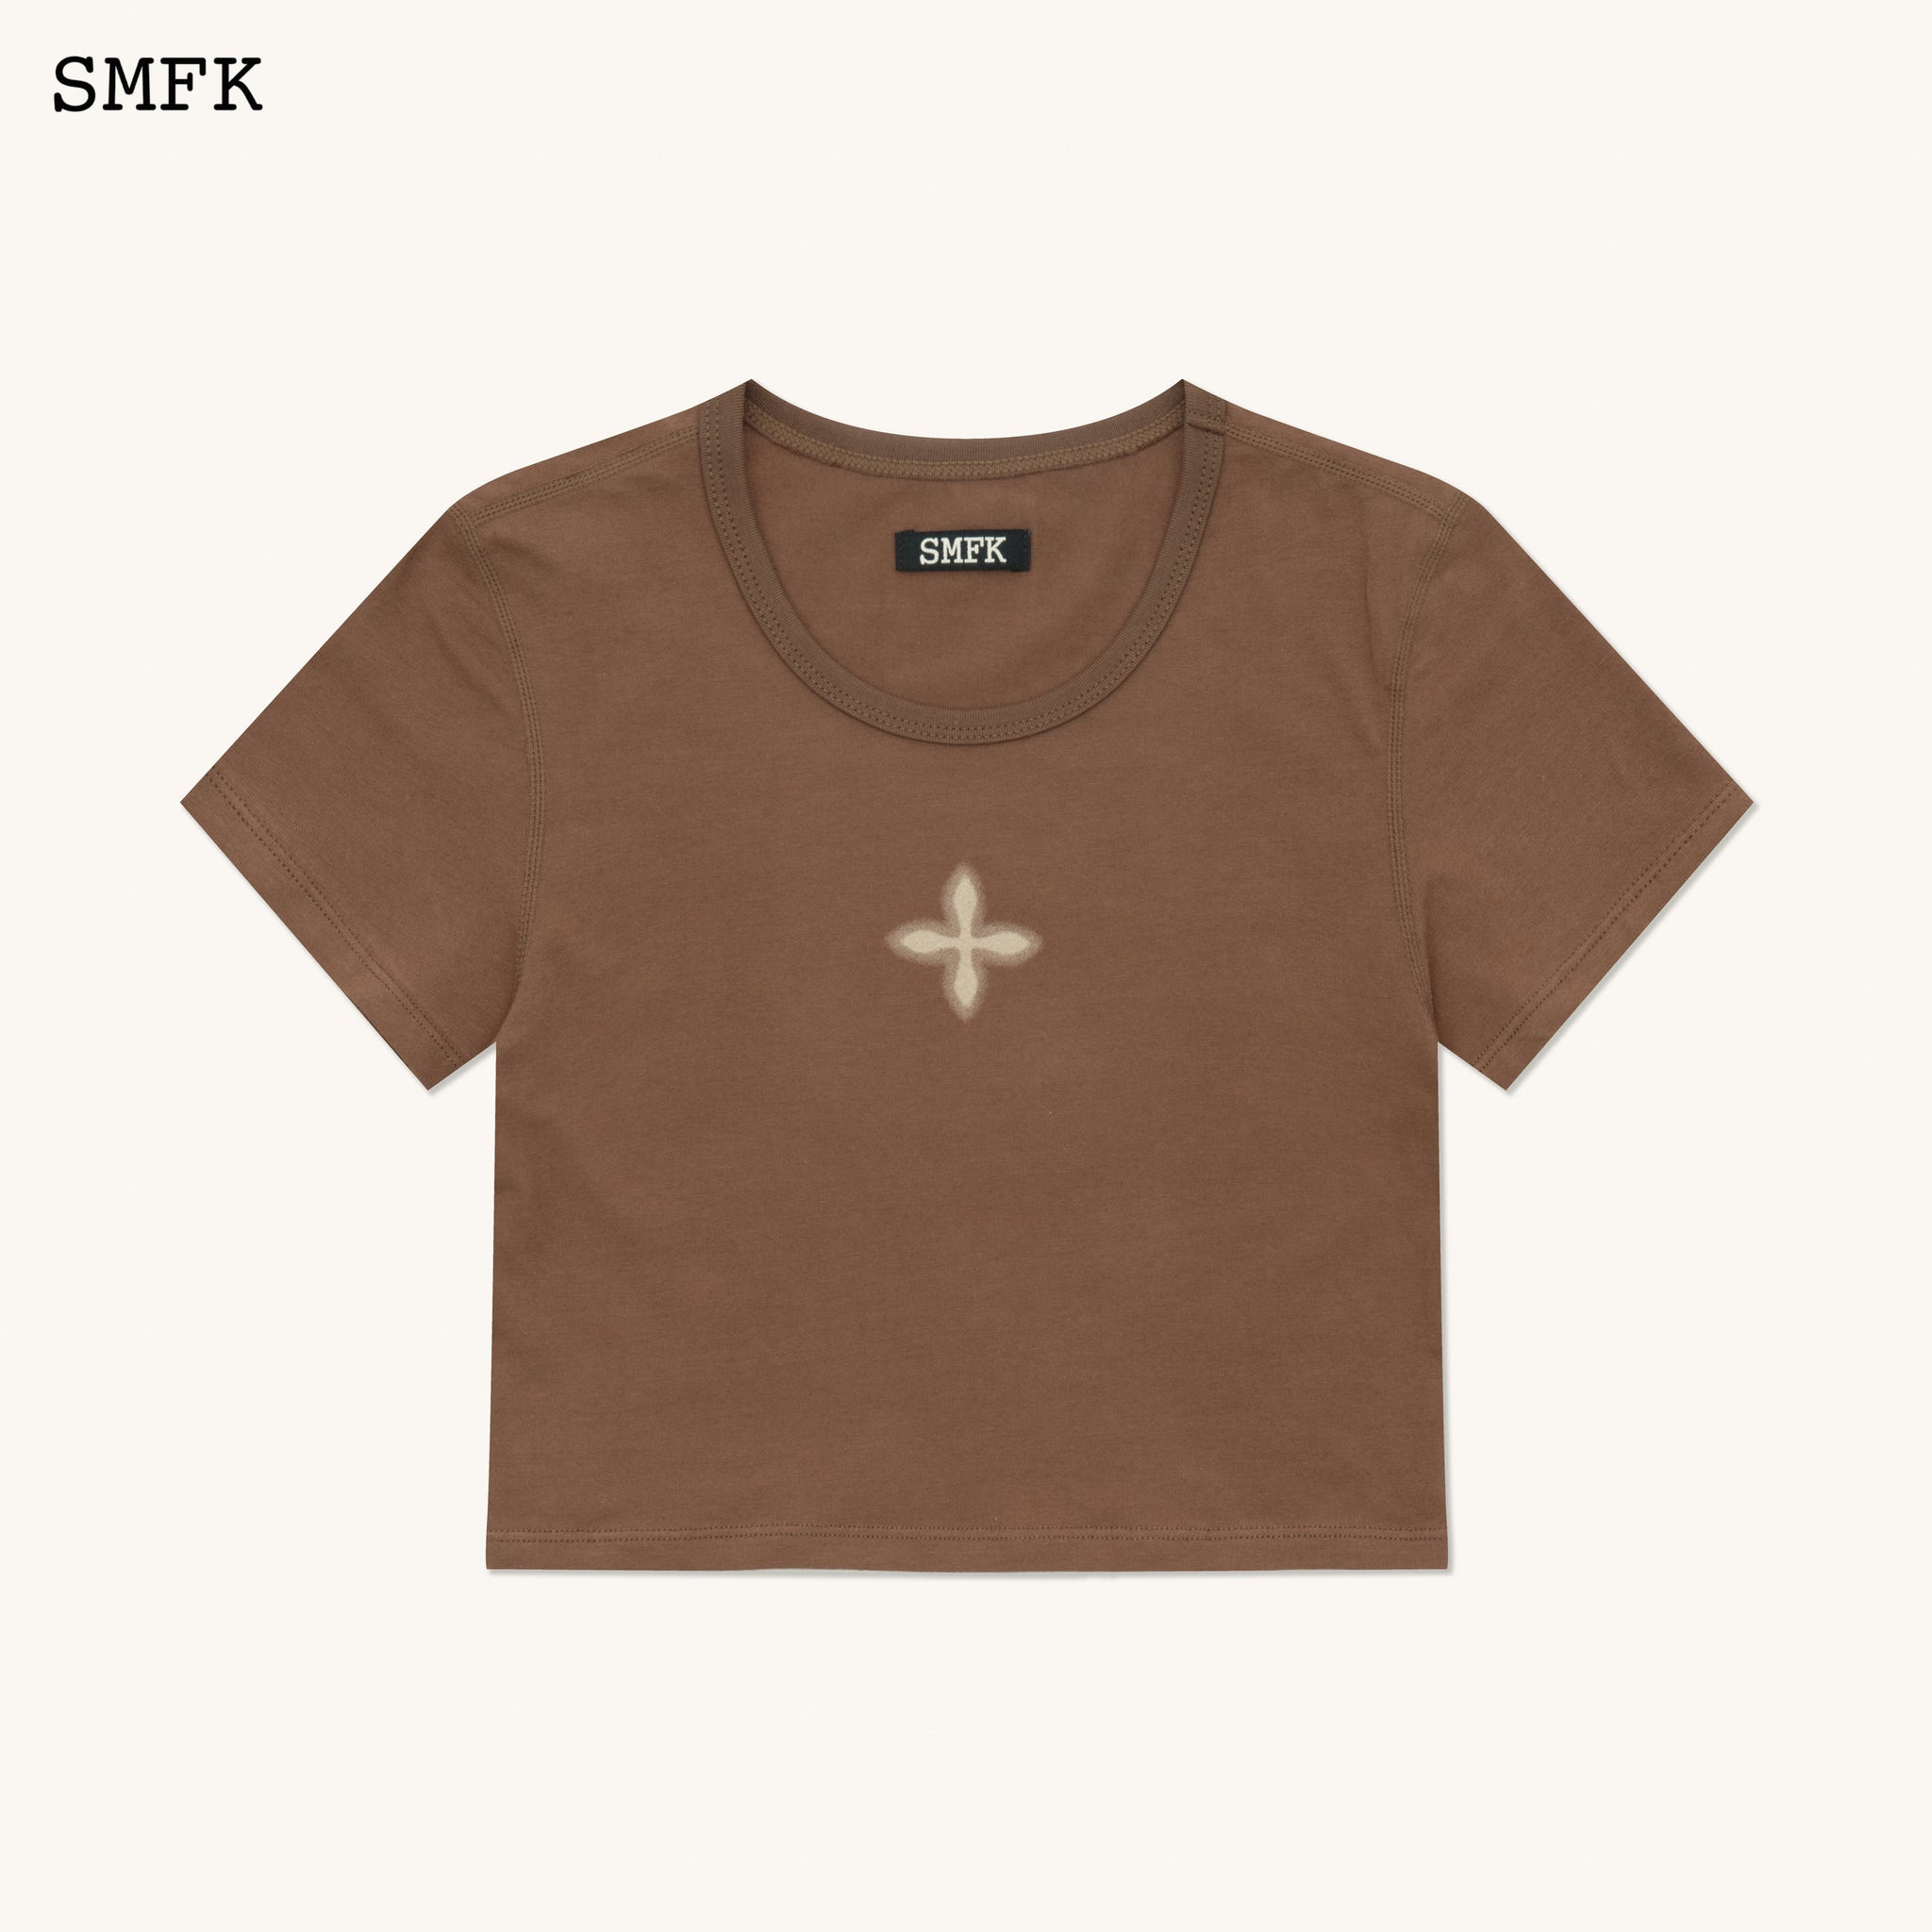 Compass Cross Sport Tights Tee In Brown